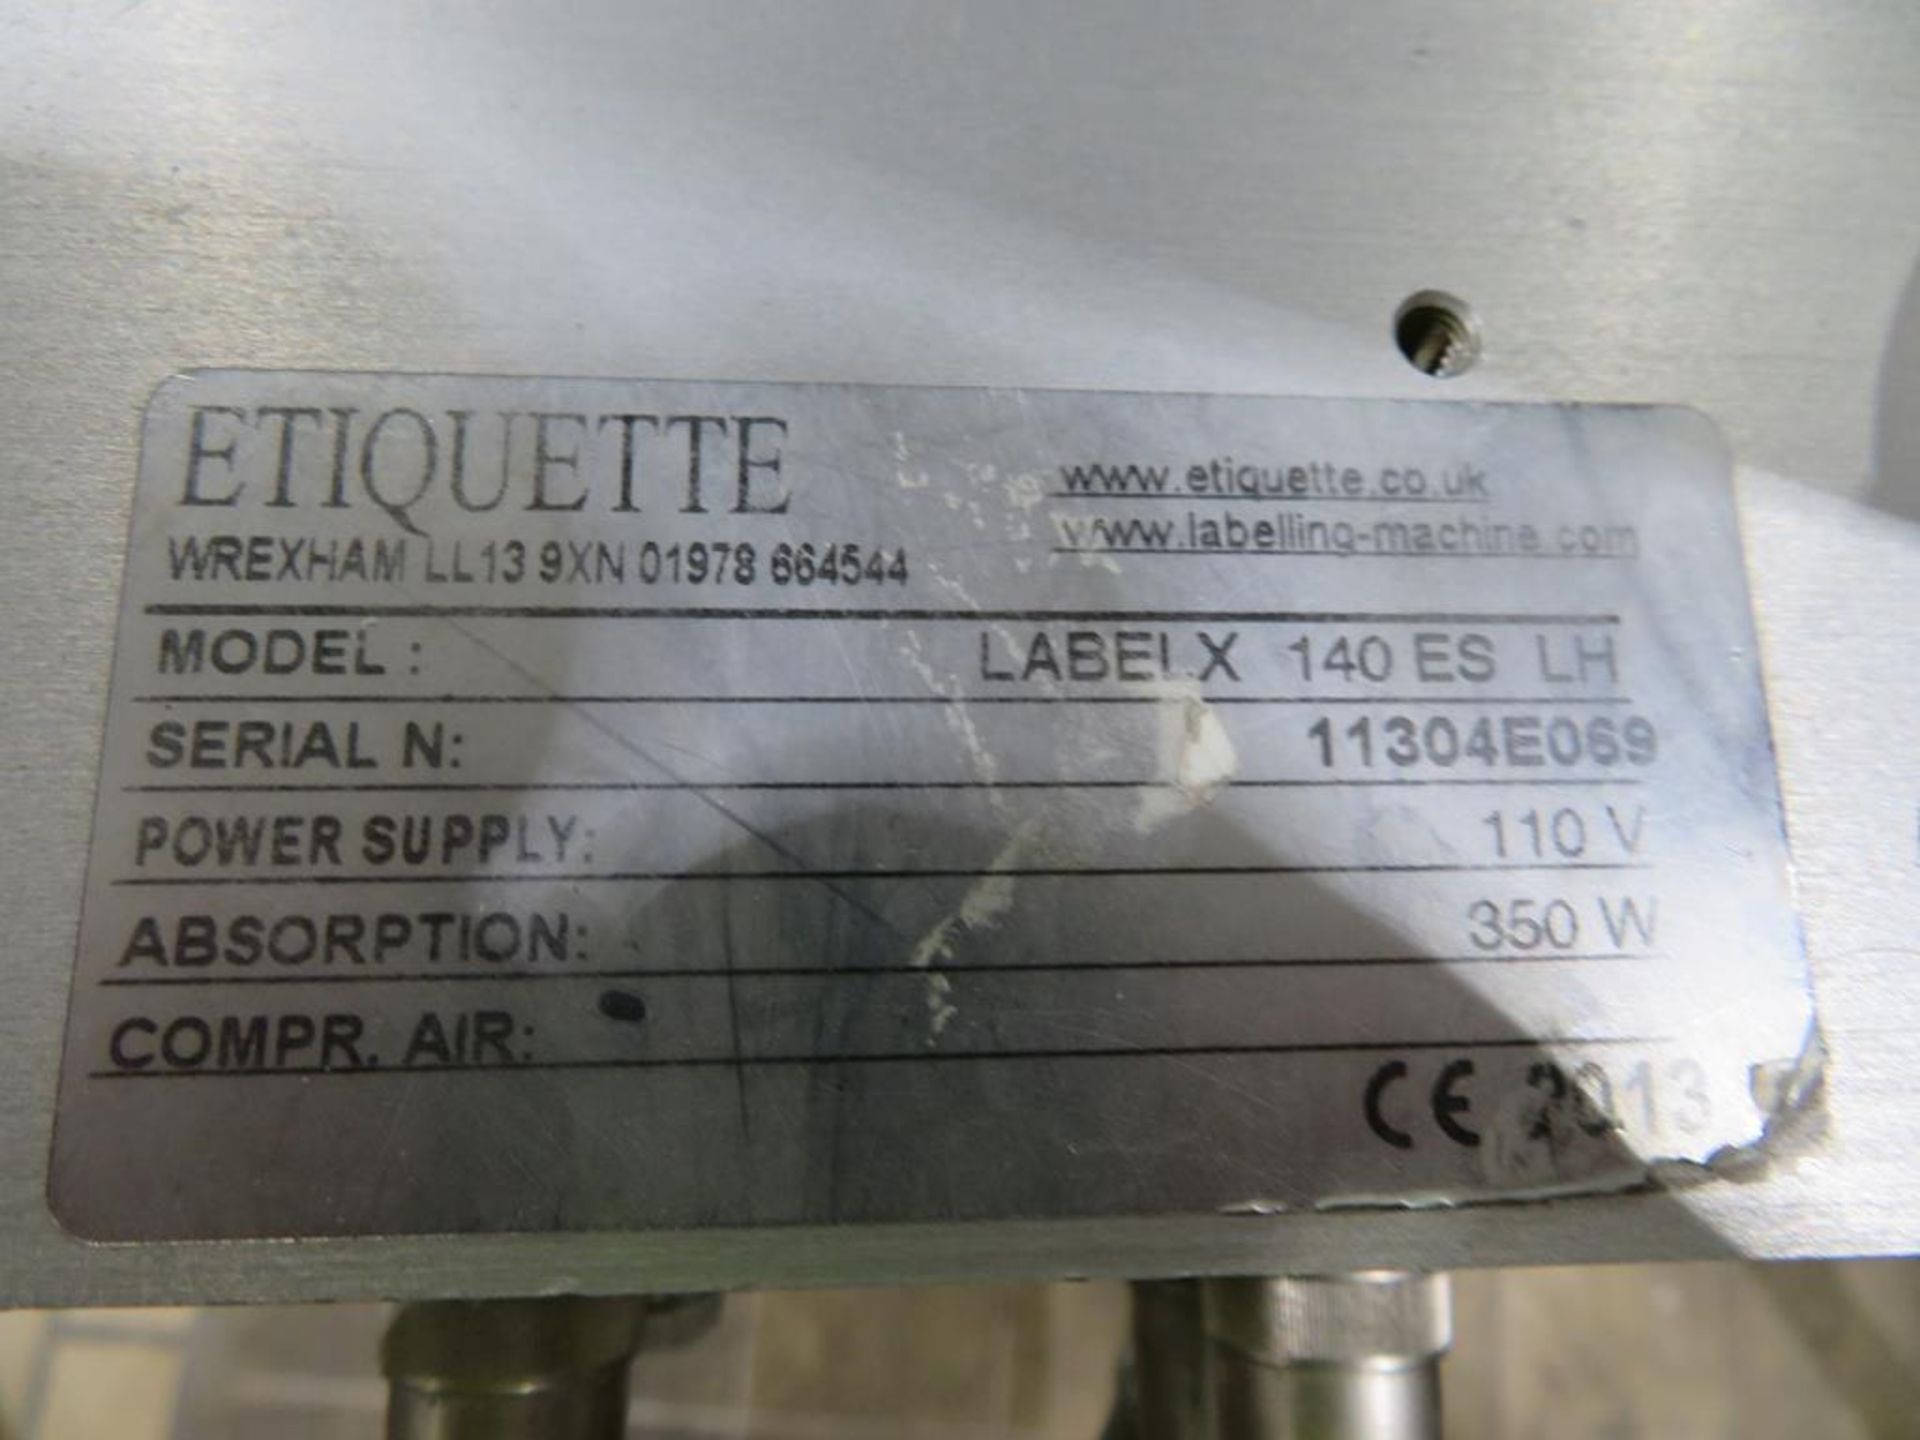 Etiquette Twin Head Side Labeller with Labelx 140 ES LH Heads and Pro Face Digital Read Outs - Image 11 of 12